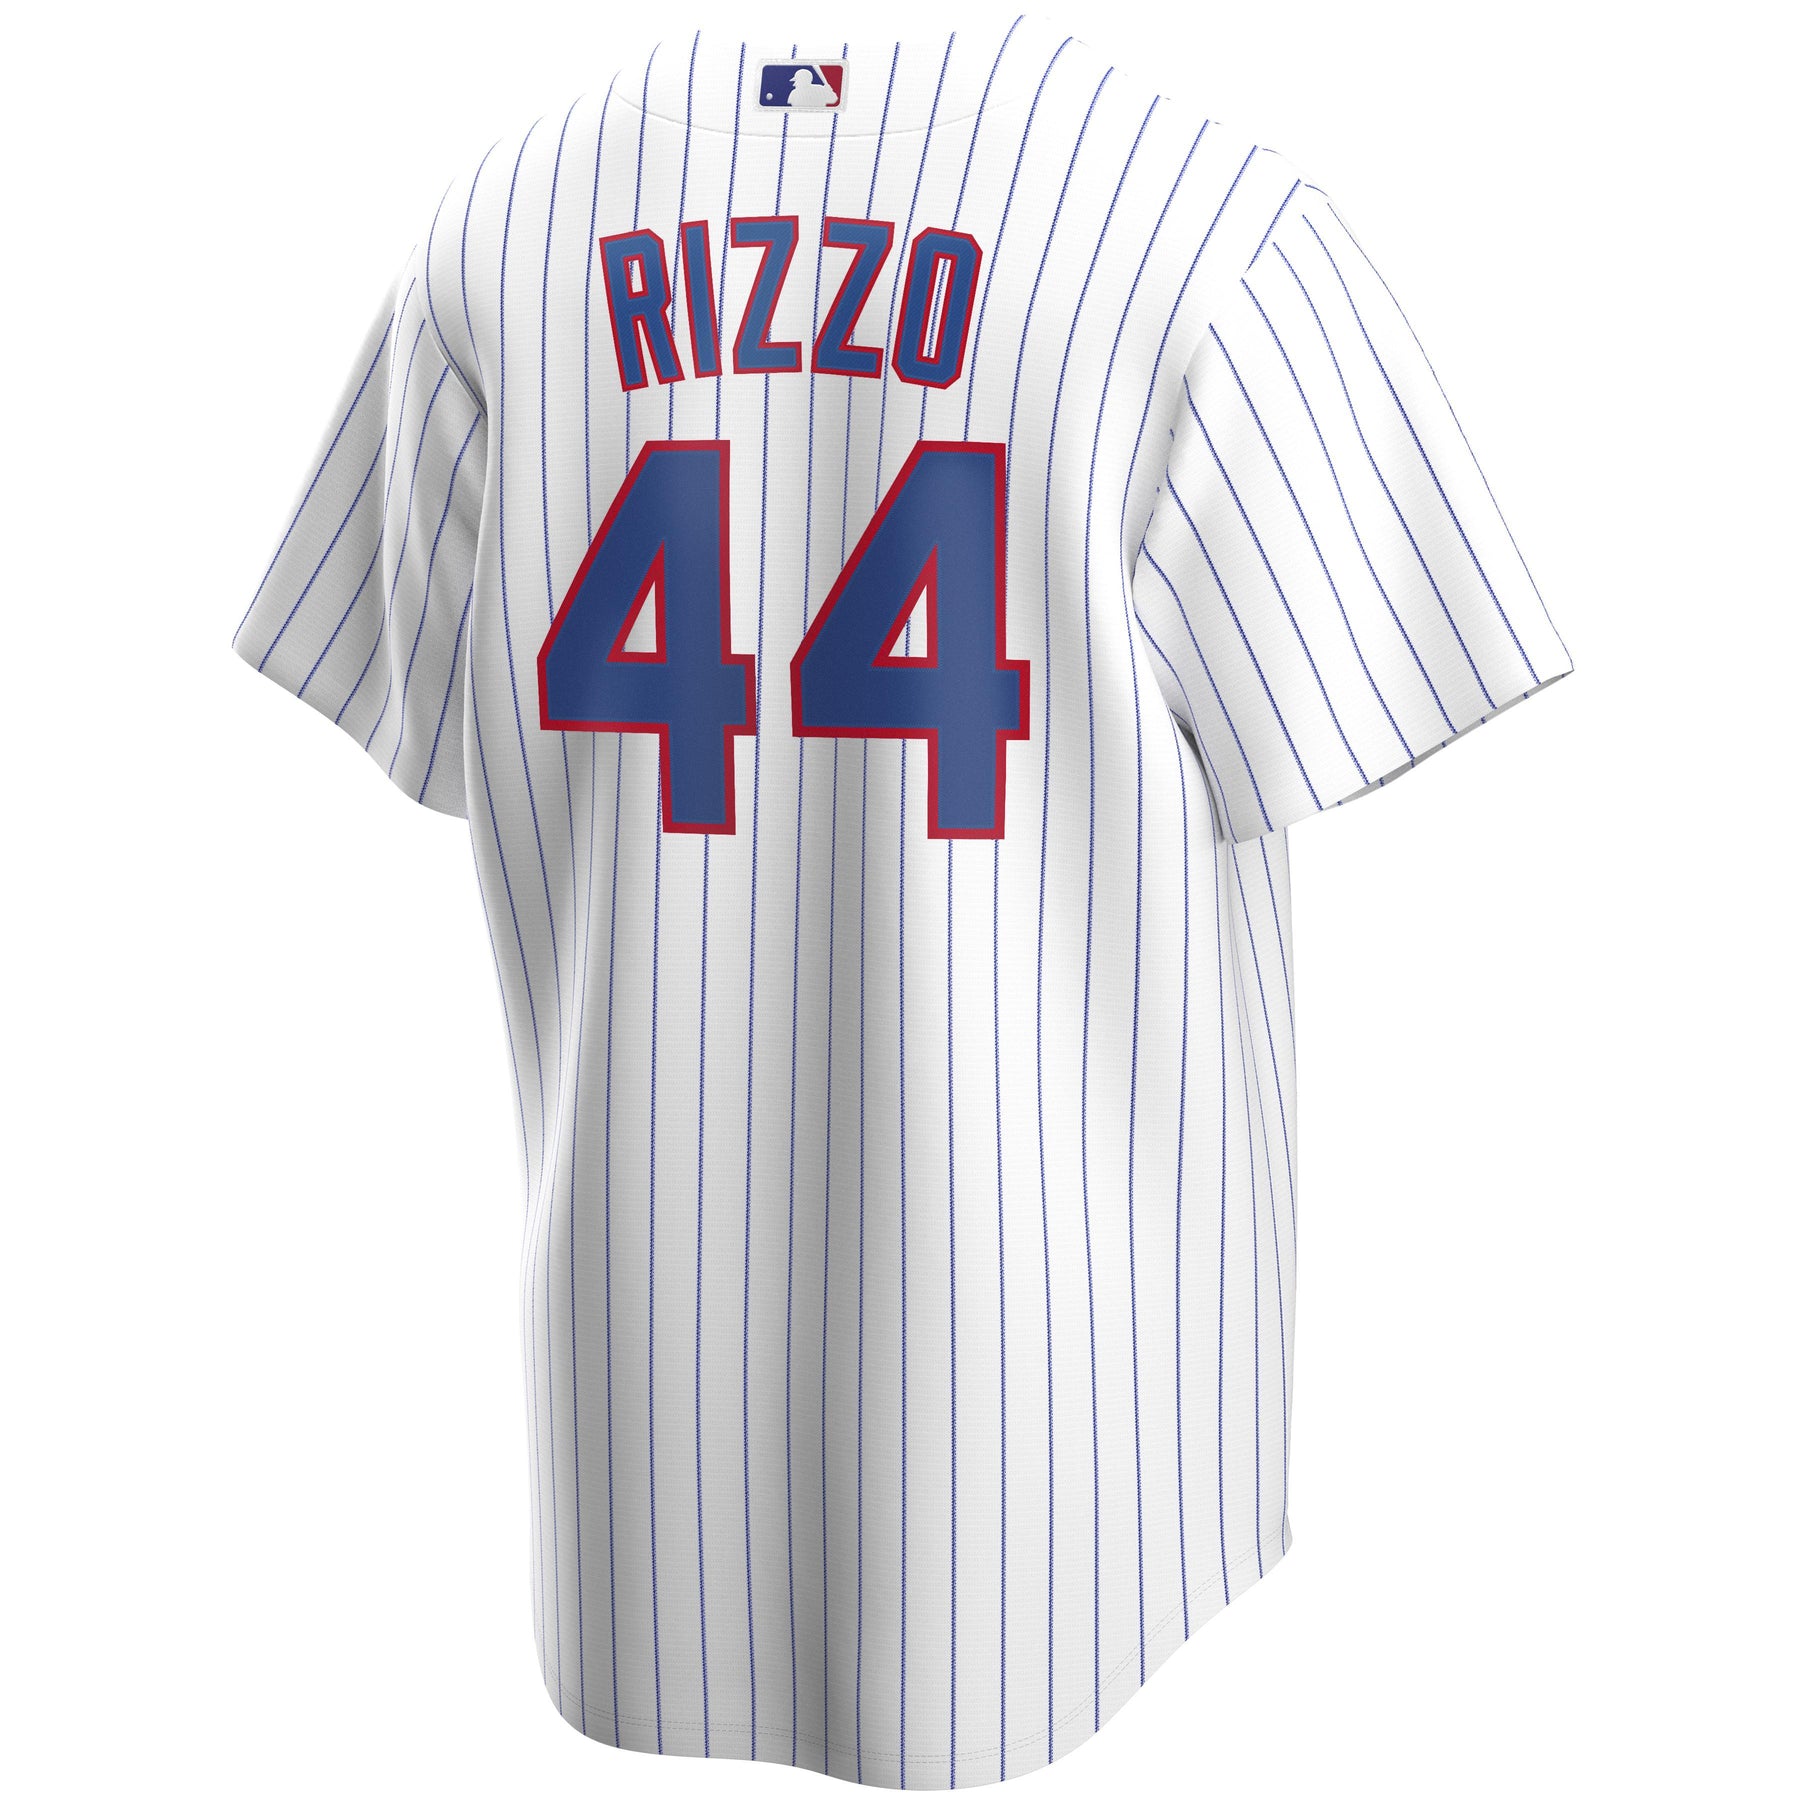 toddler rizzo jersey